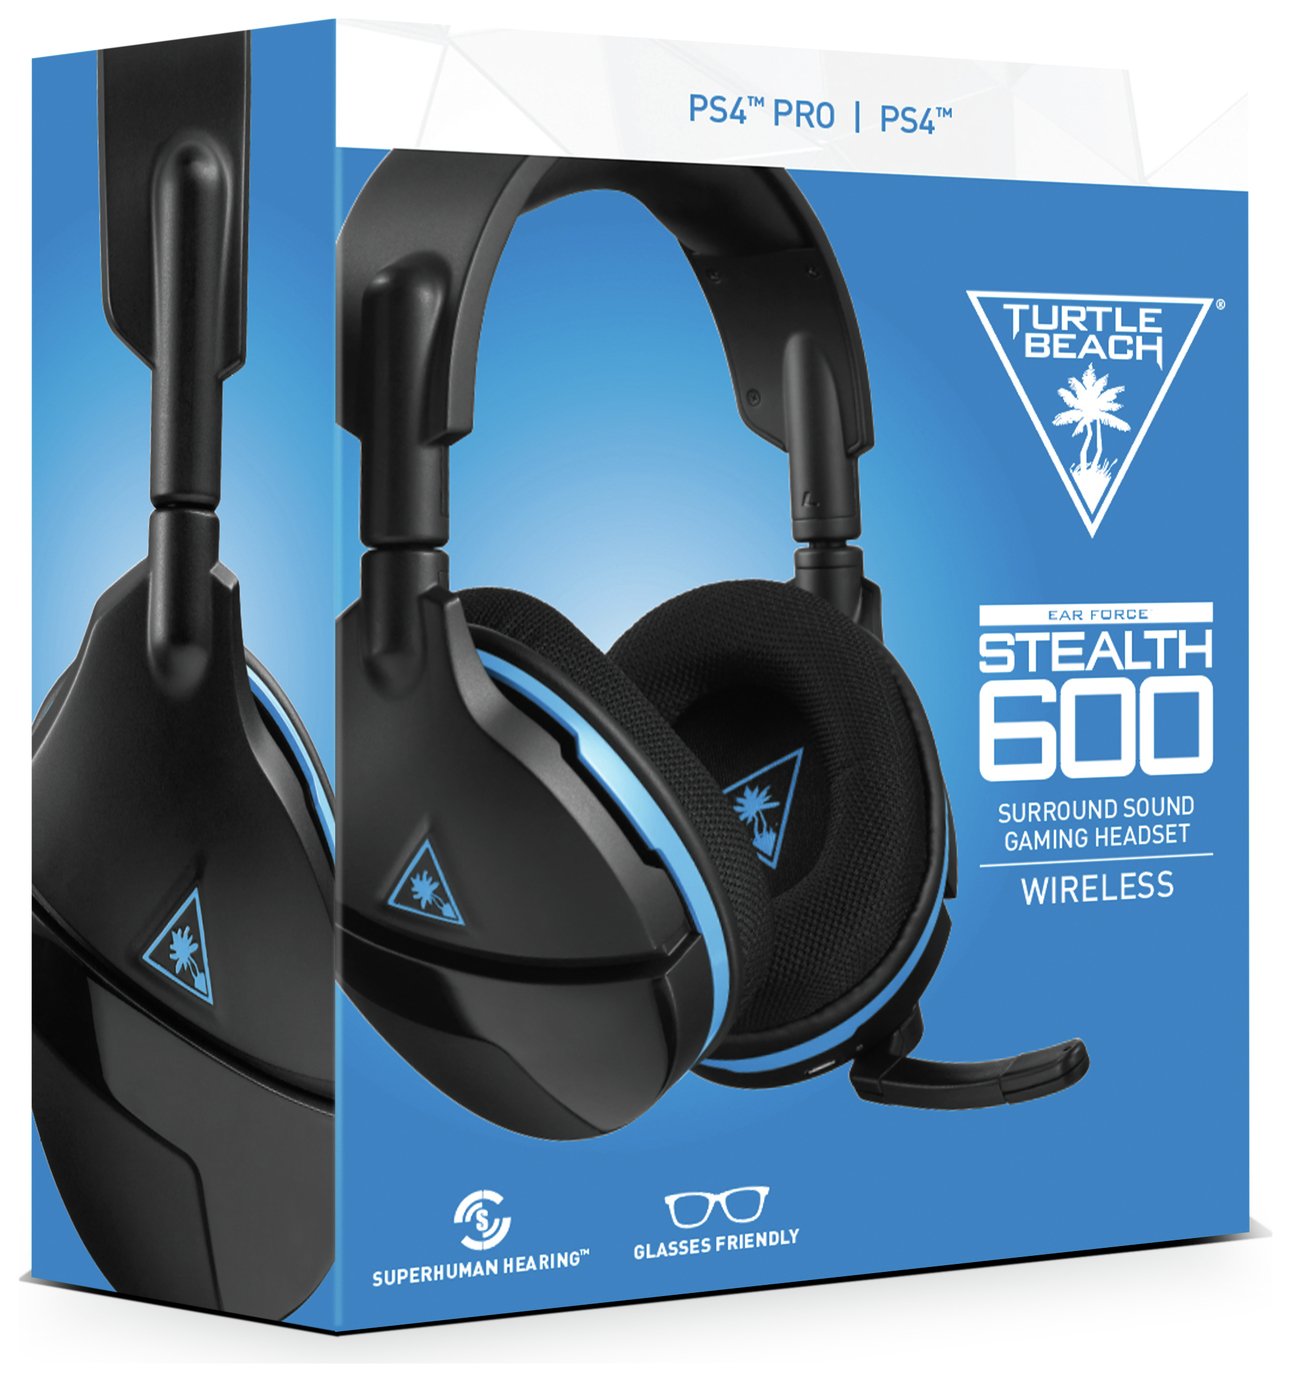 Turtle Beach Stealth 600 Wireless PS4 Headset Review